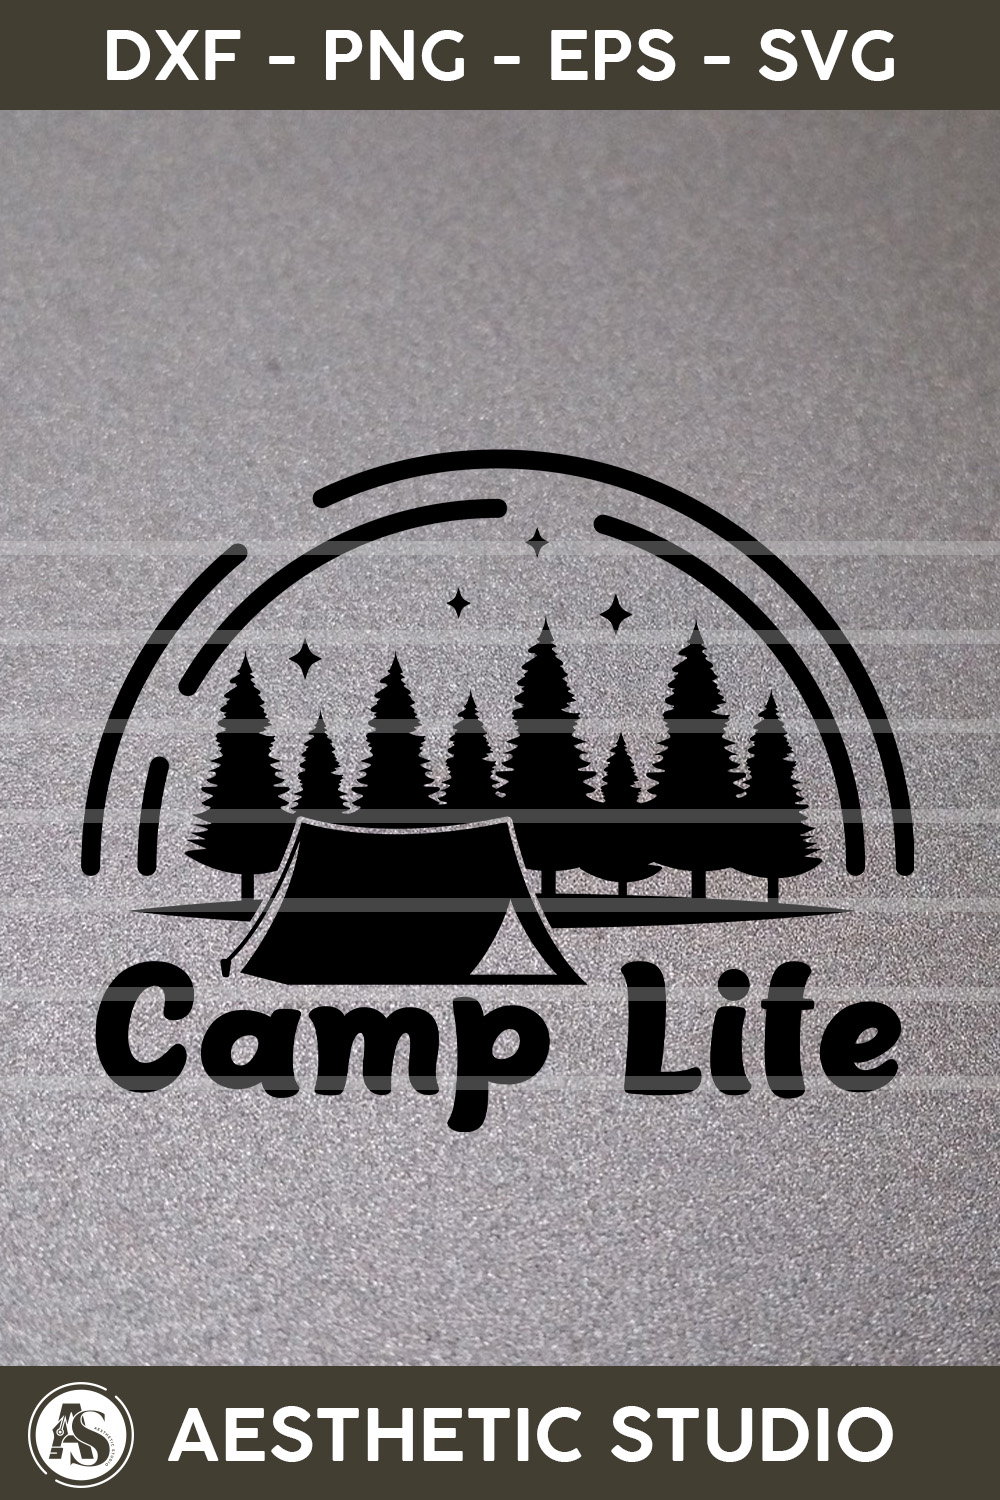 Camp Life, Camper, Adventure, Camp Life, Camping Svg, Typography, Camping Quotes, Camping Cut File, Funny Camping, Camping T-shirt Design, Svg, Eps, Dxf, Png, Cut file pinterest preview image.